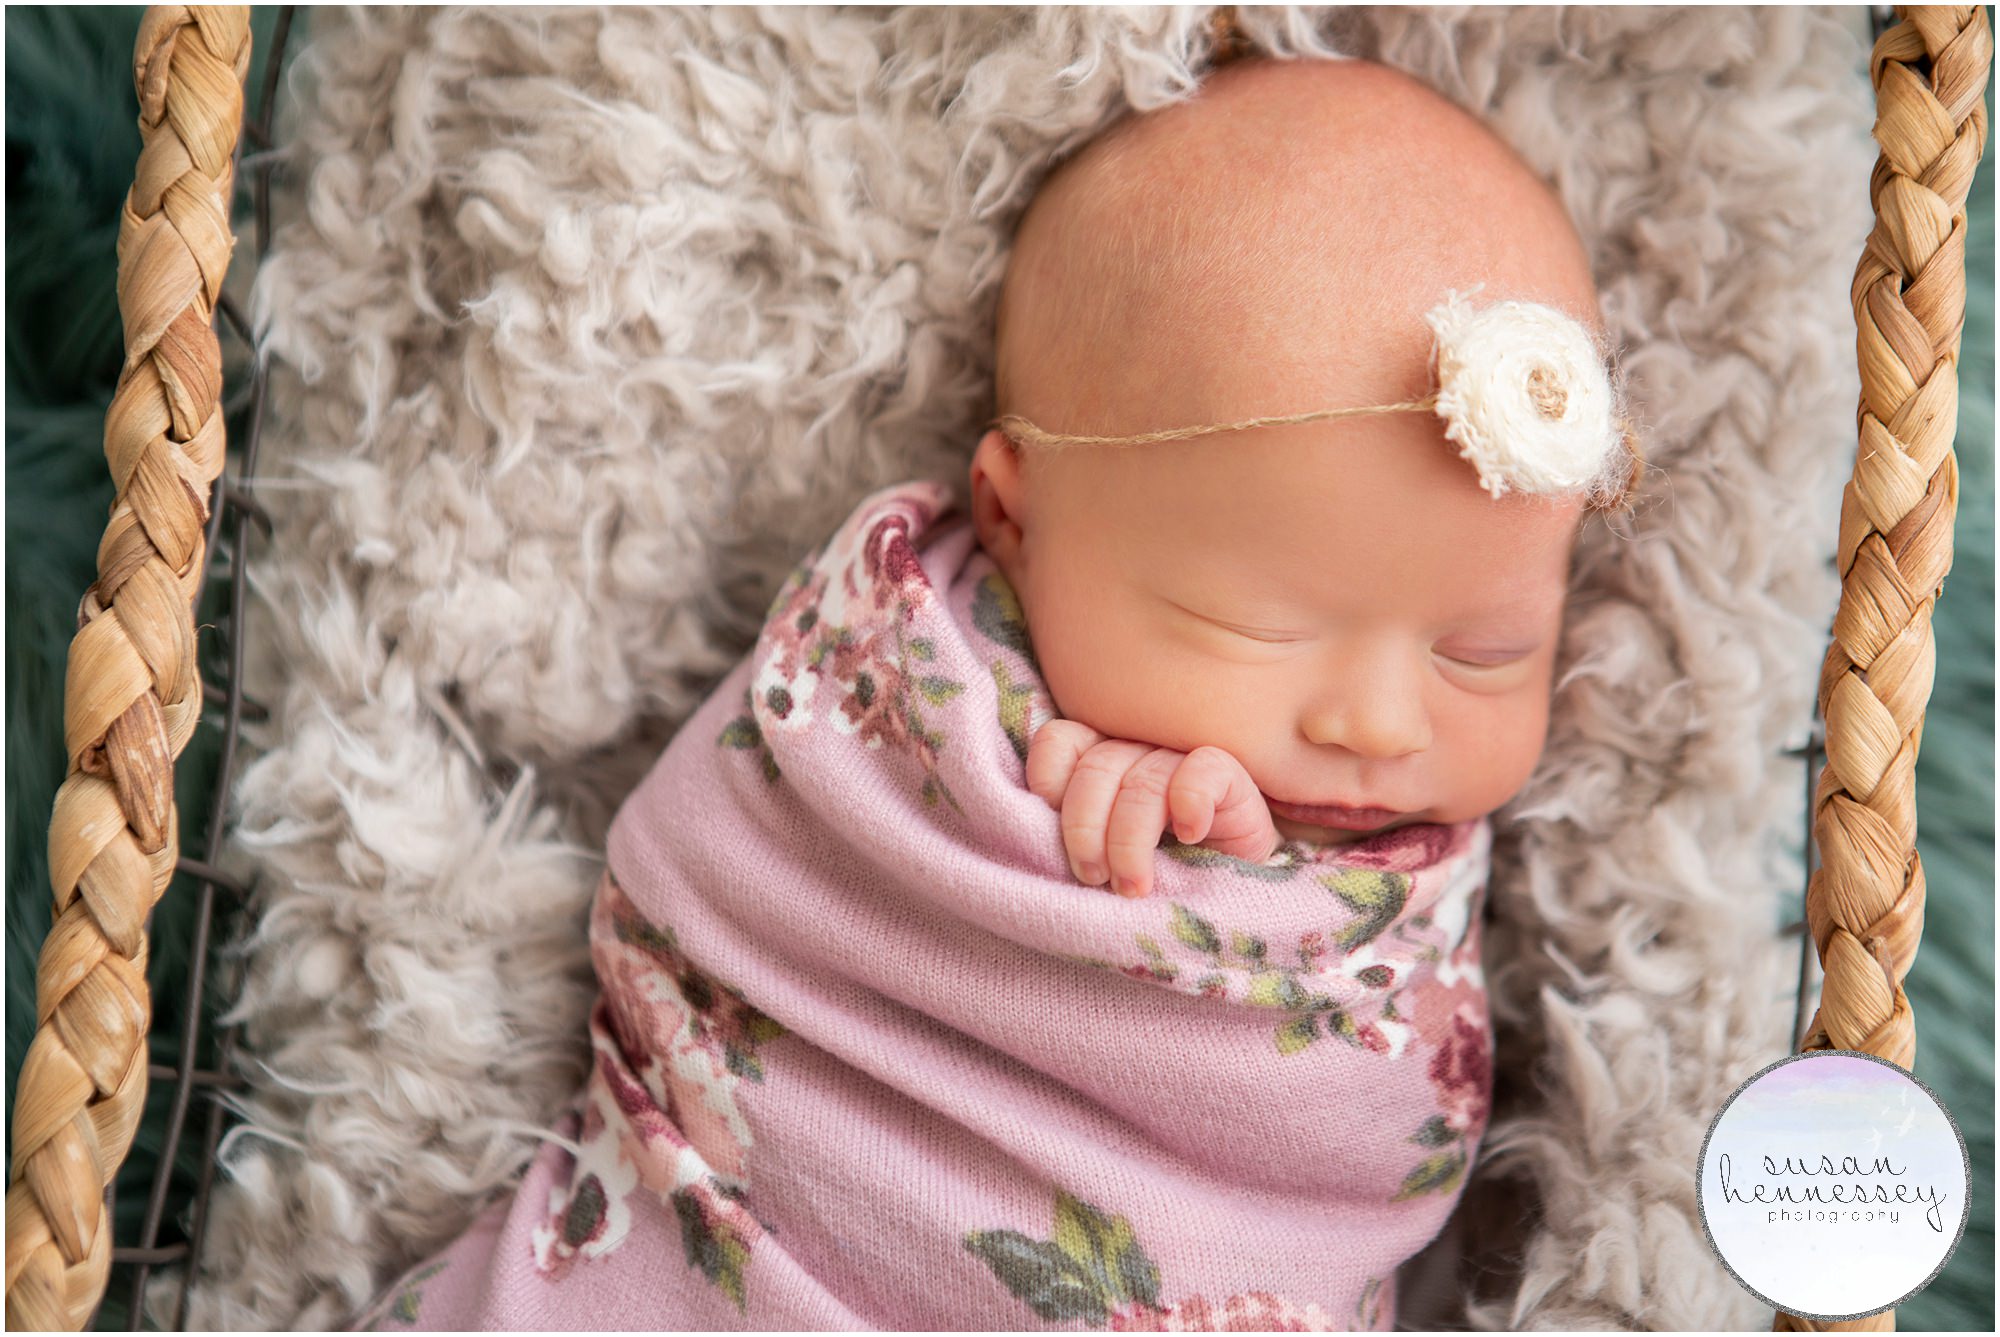 A look back at Maura's newborn session following her Rainbow Themed Cake Smash session.